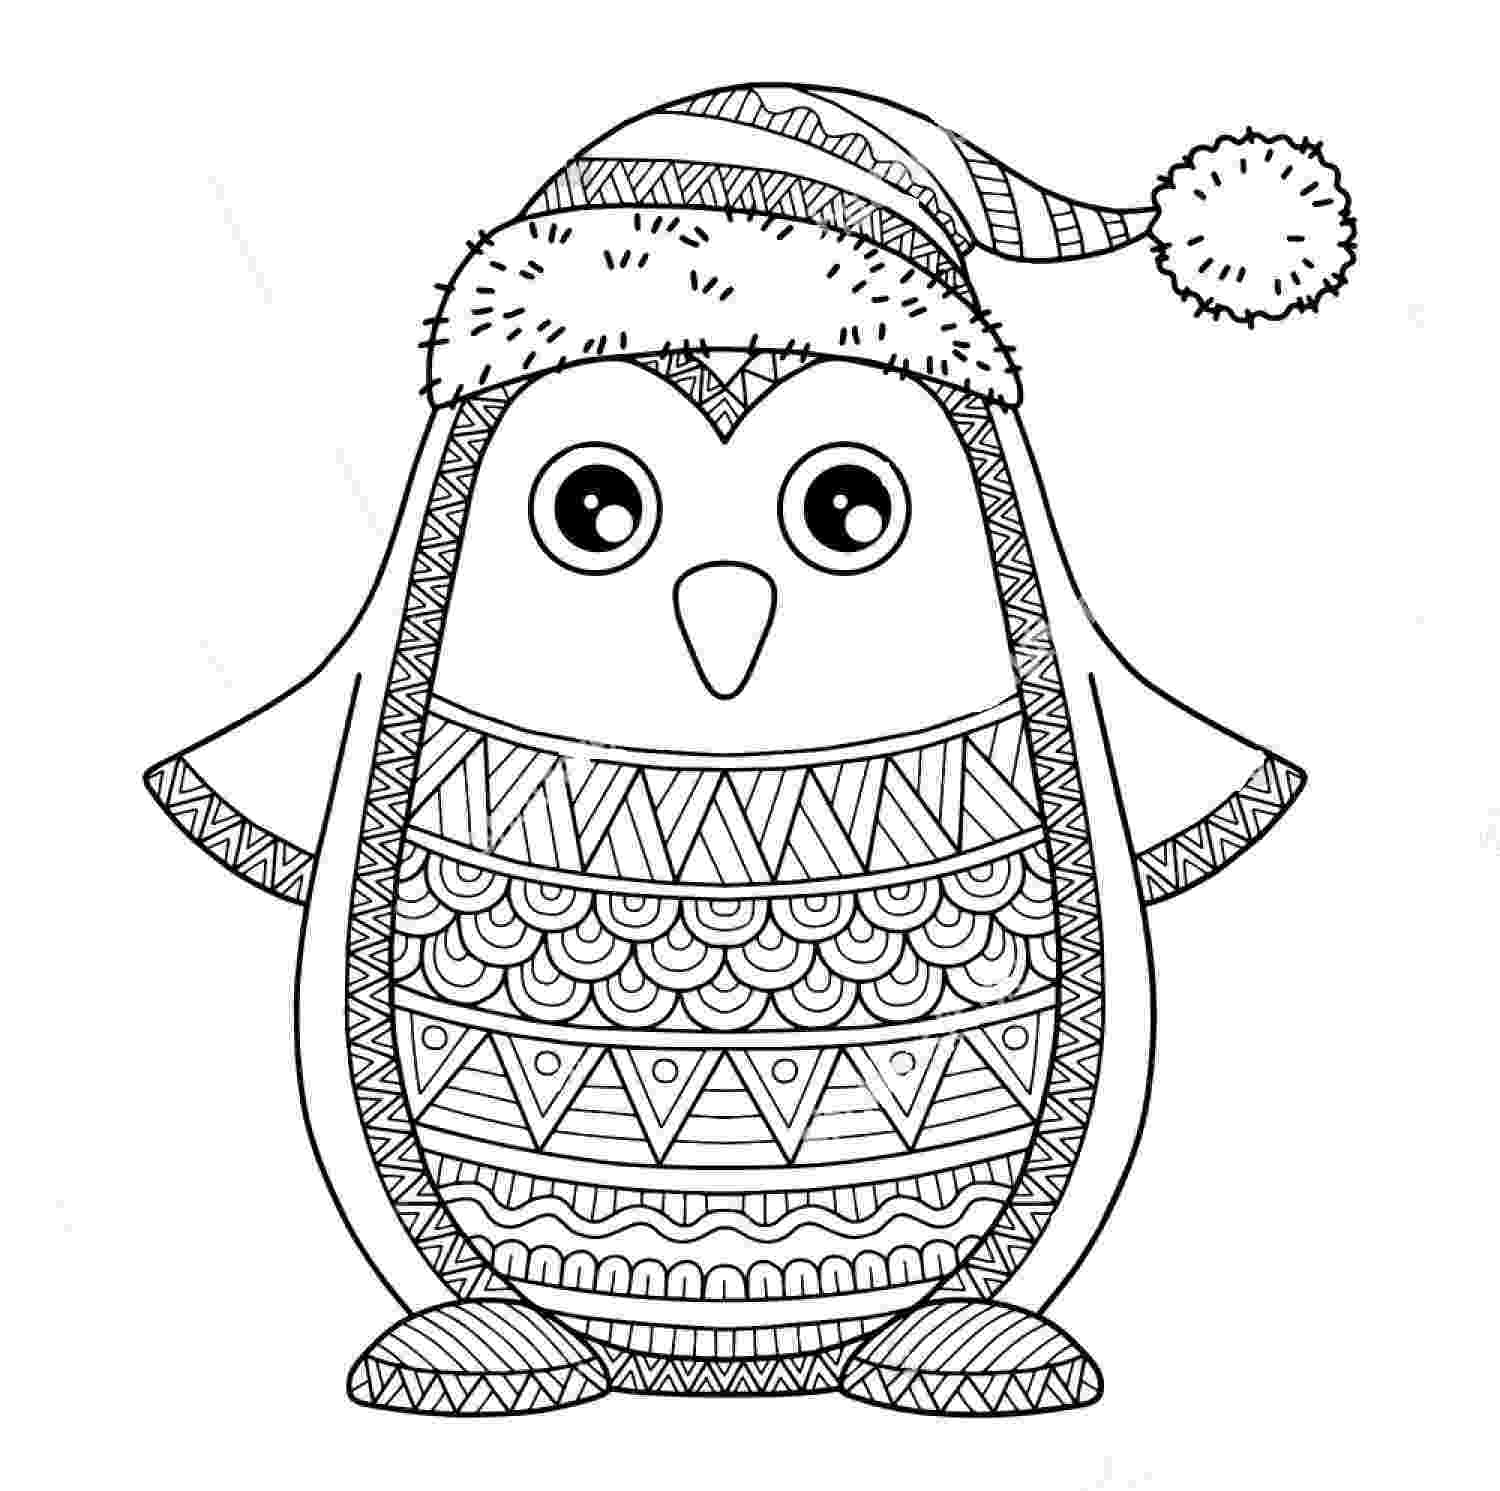 color zentangle 24 more free printable adult coloring pages color zentangle 